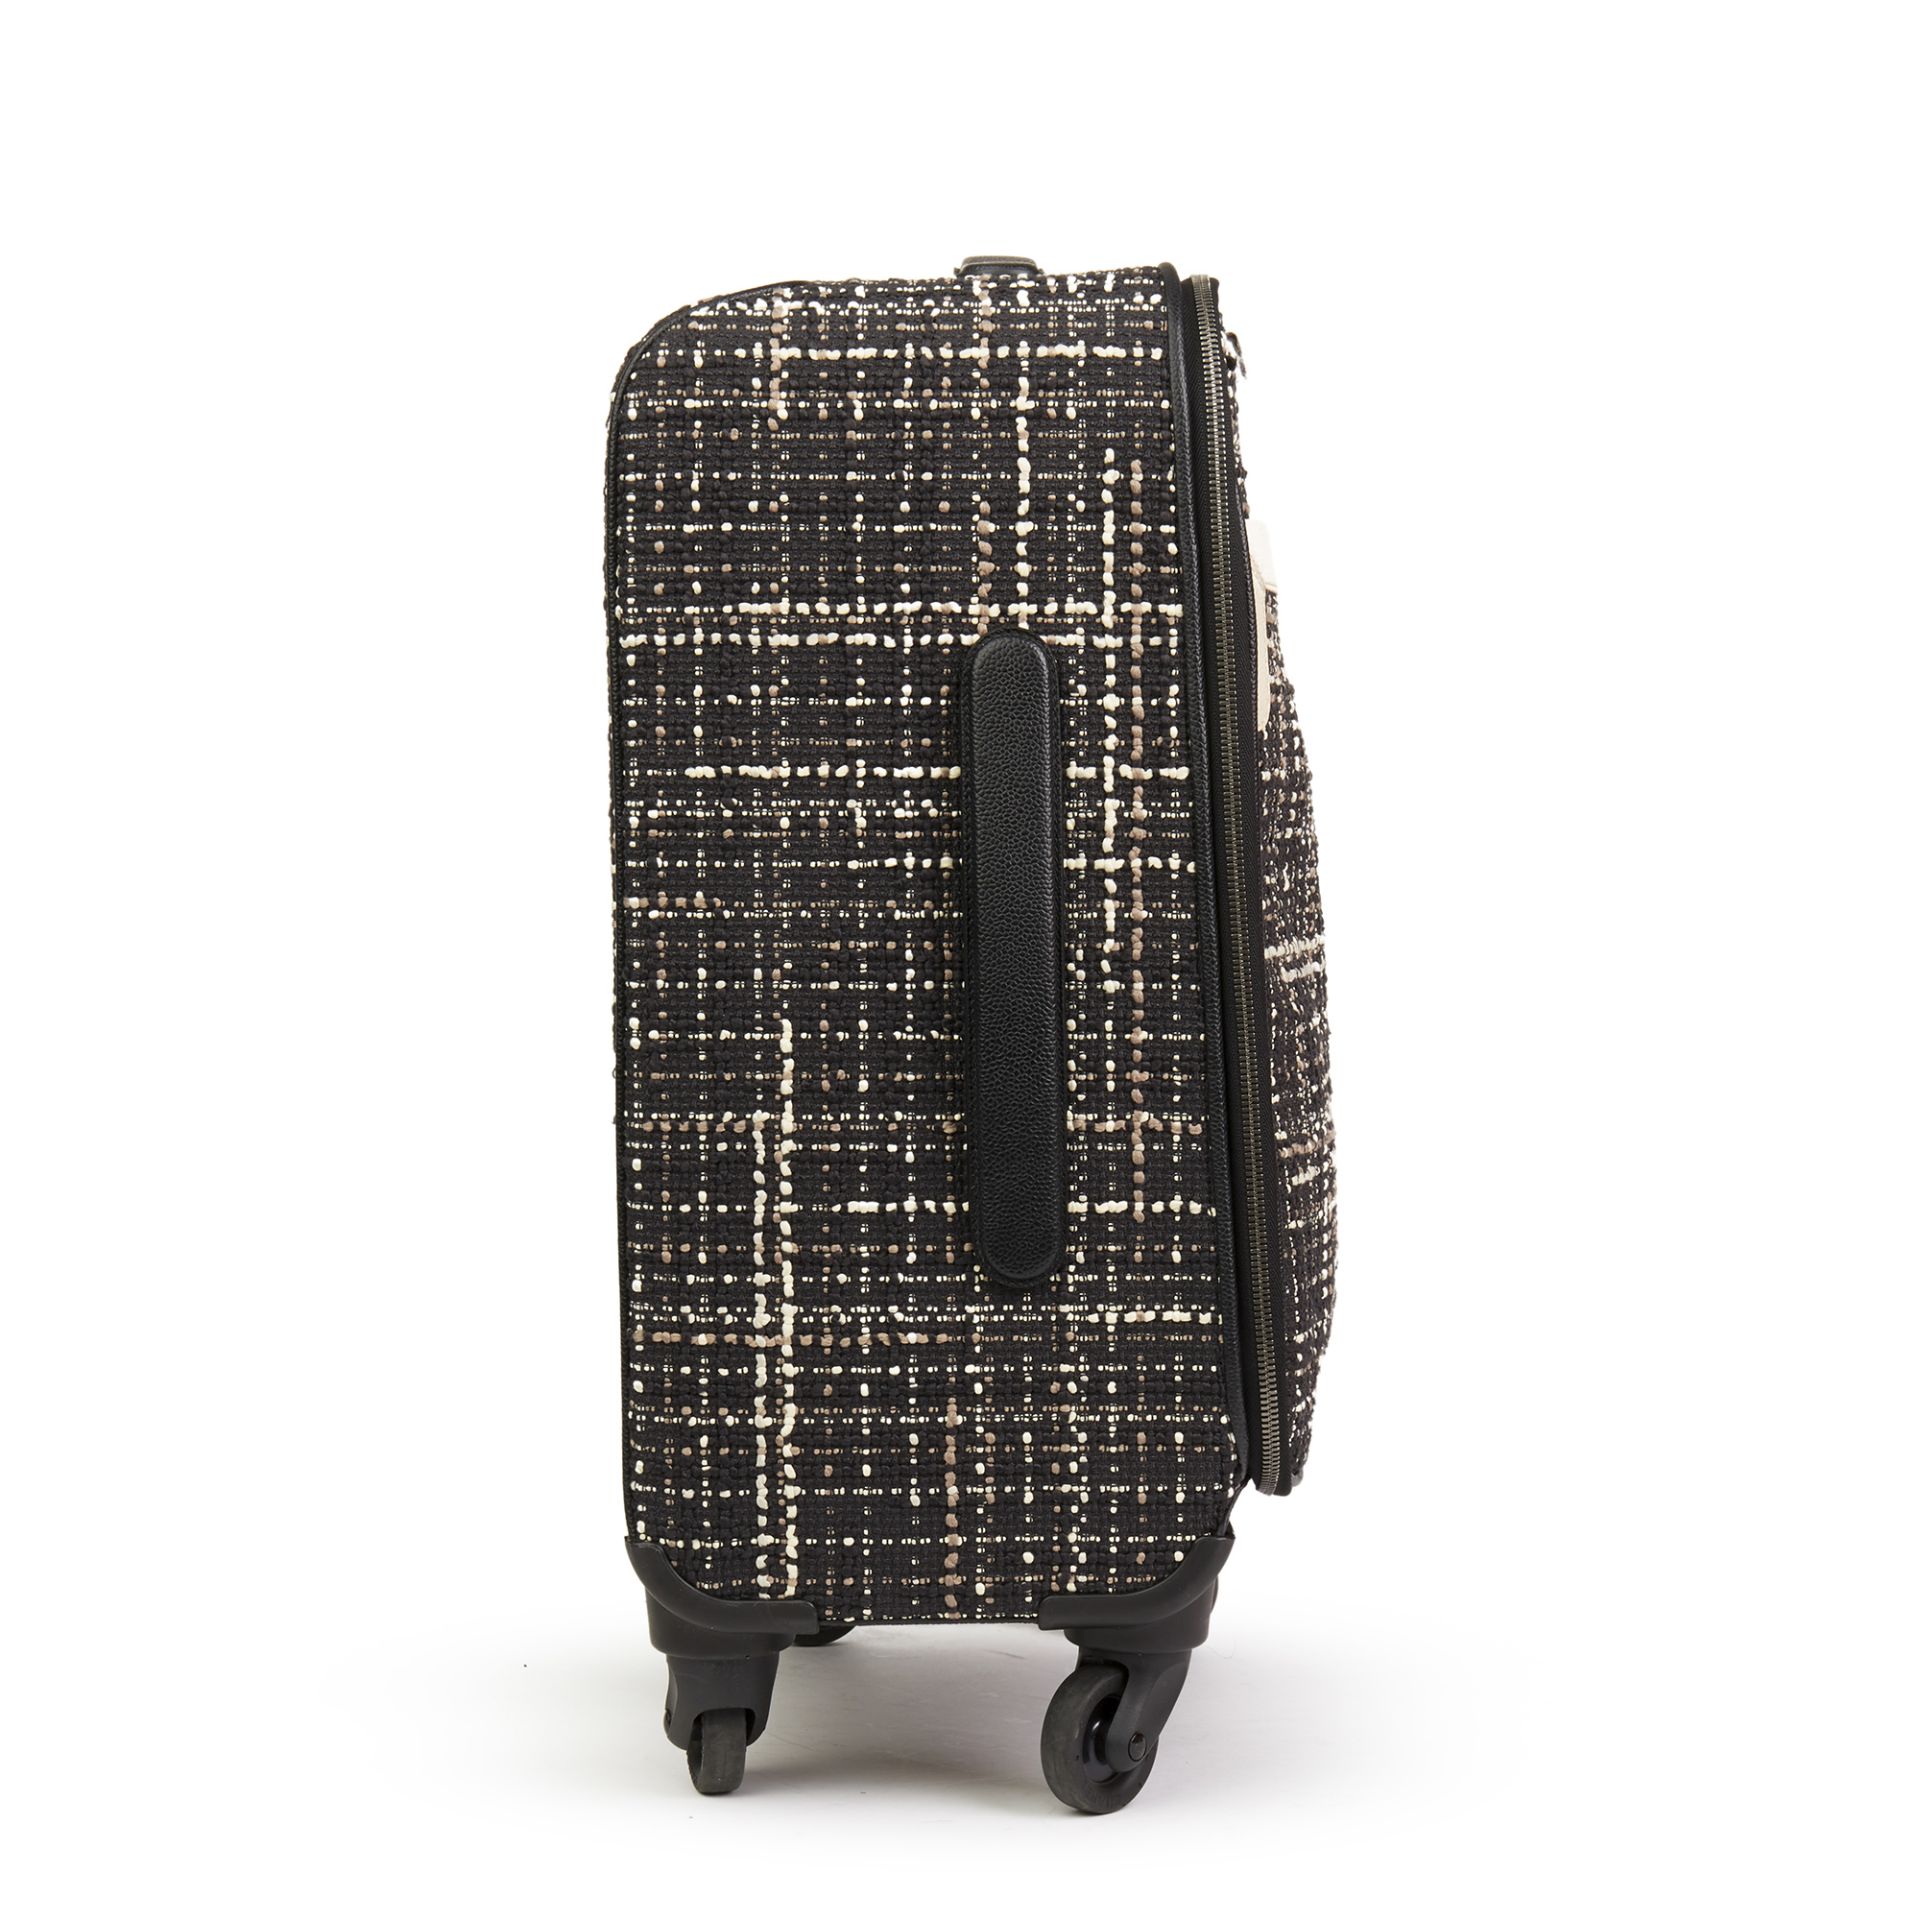 Chanel Jacket Trolley Rolling Suitcase - Image 13 of 13